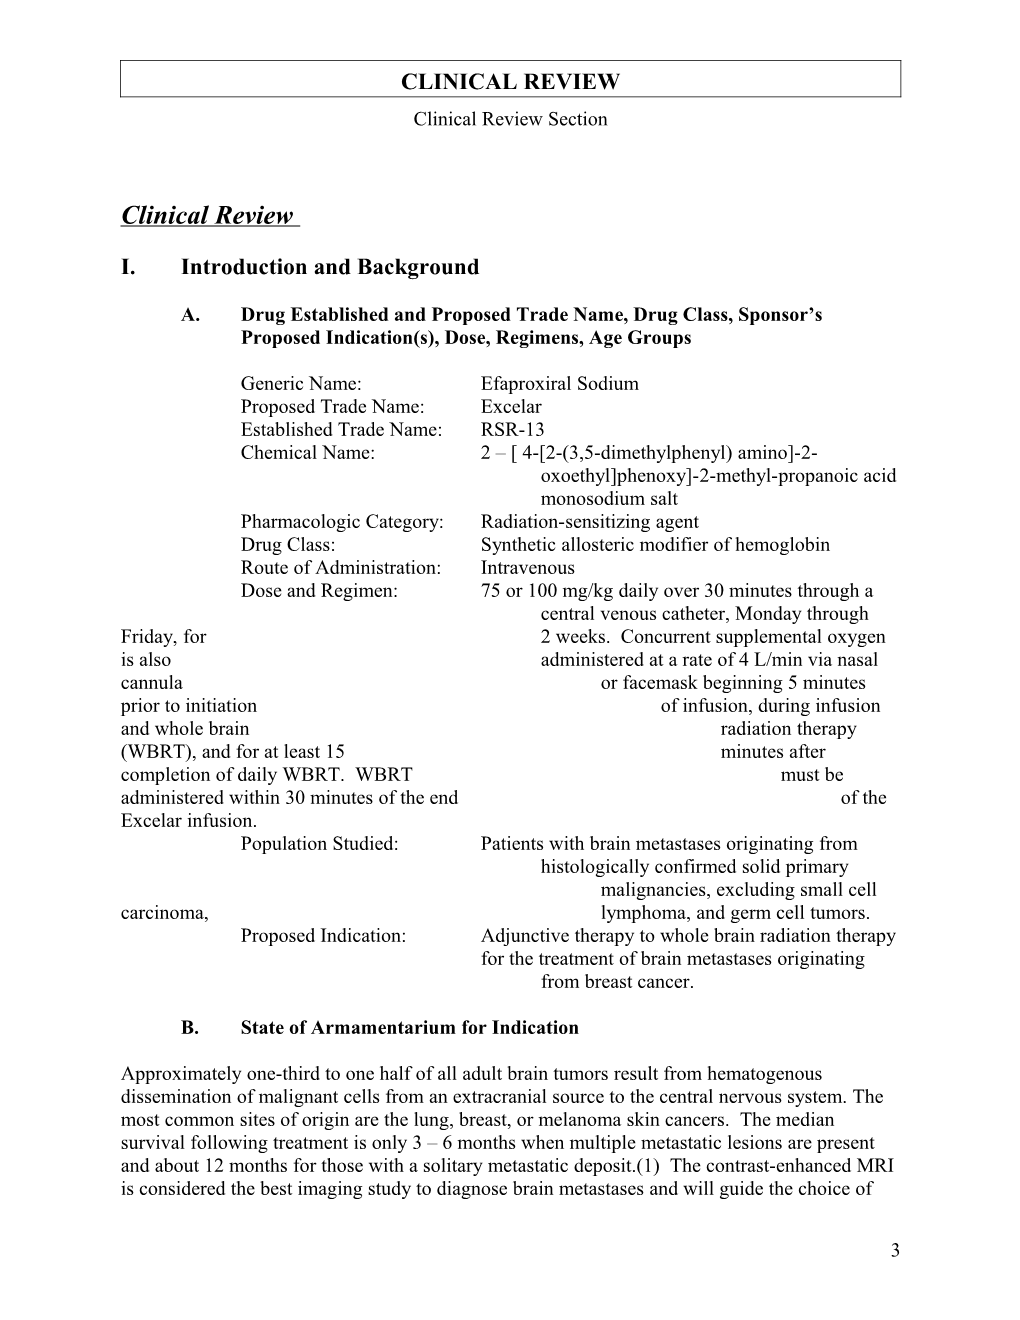 Clinical Review Template 032201